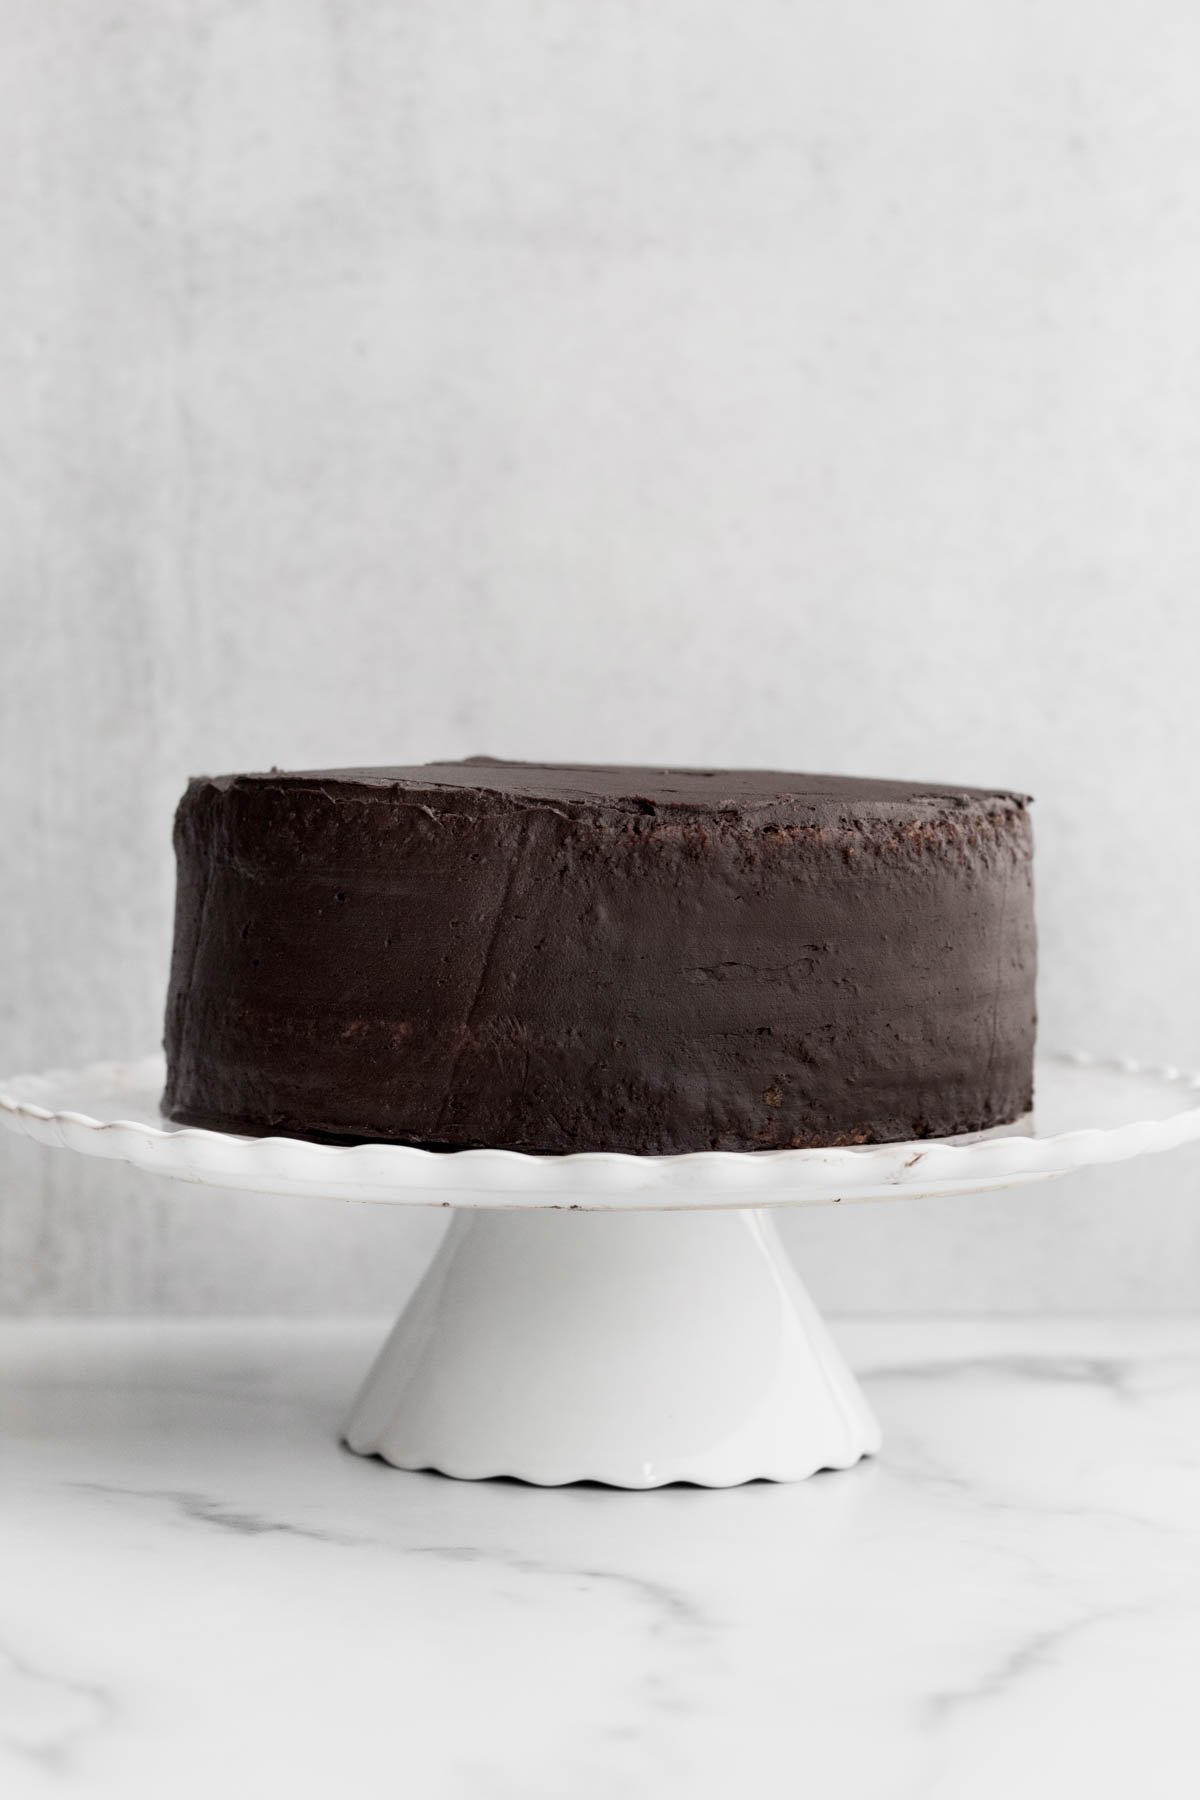 Chocolate frosted cake on a cake stand.